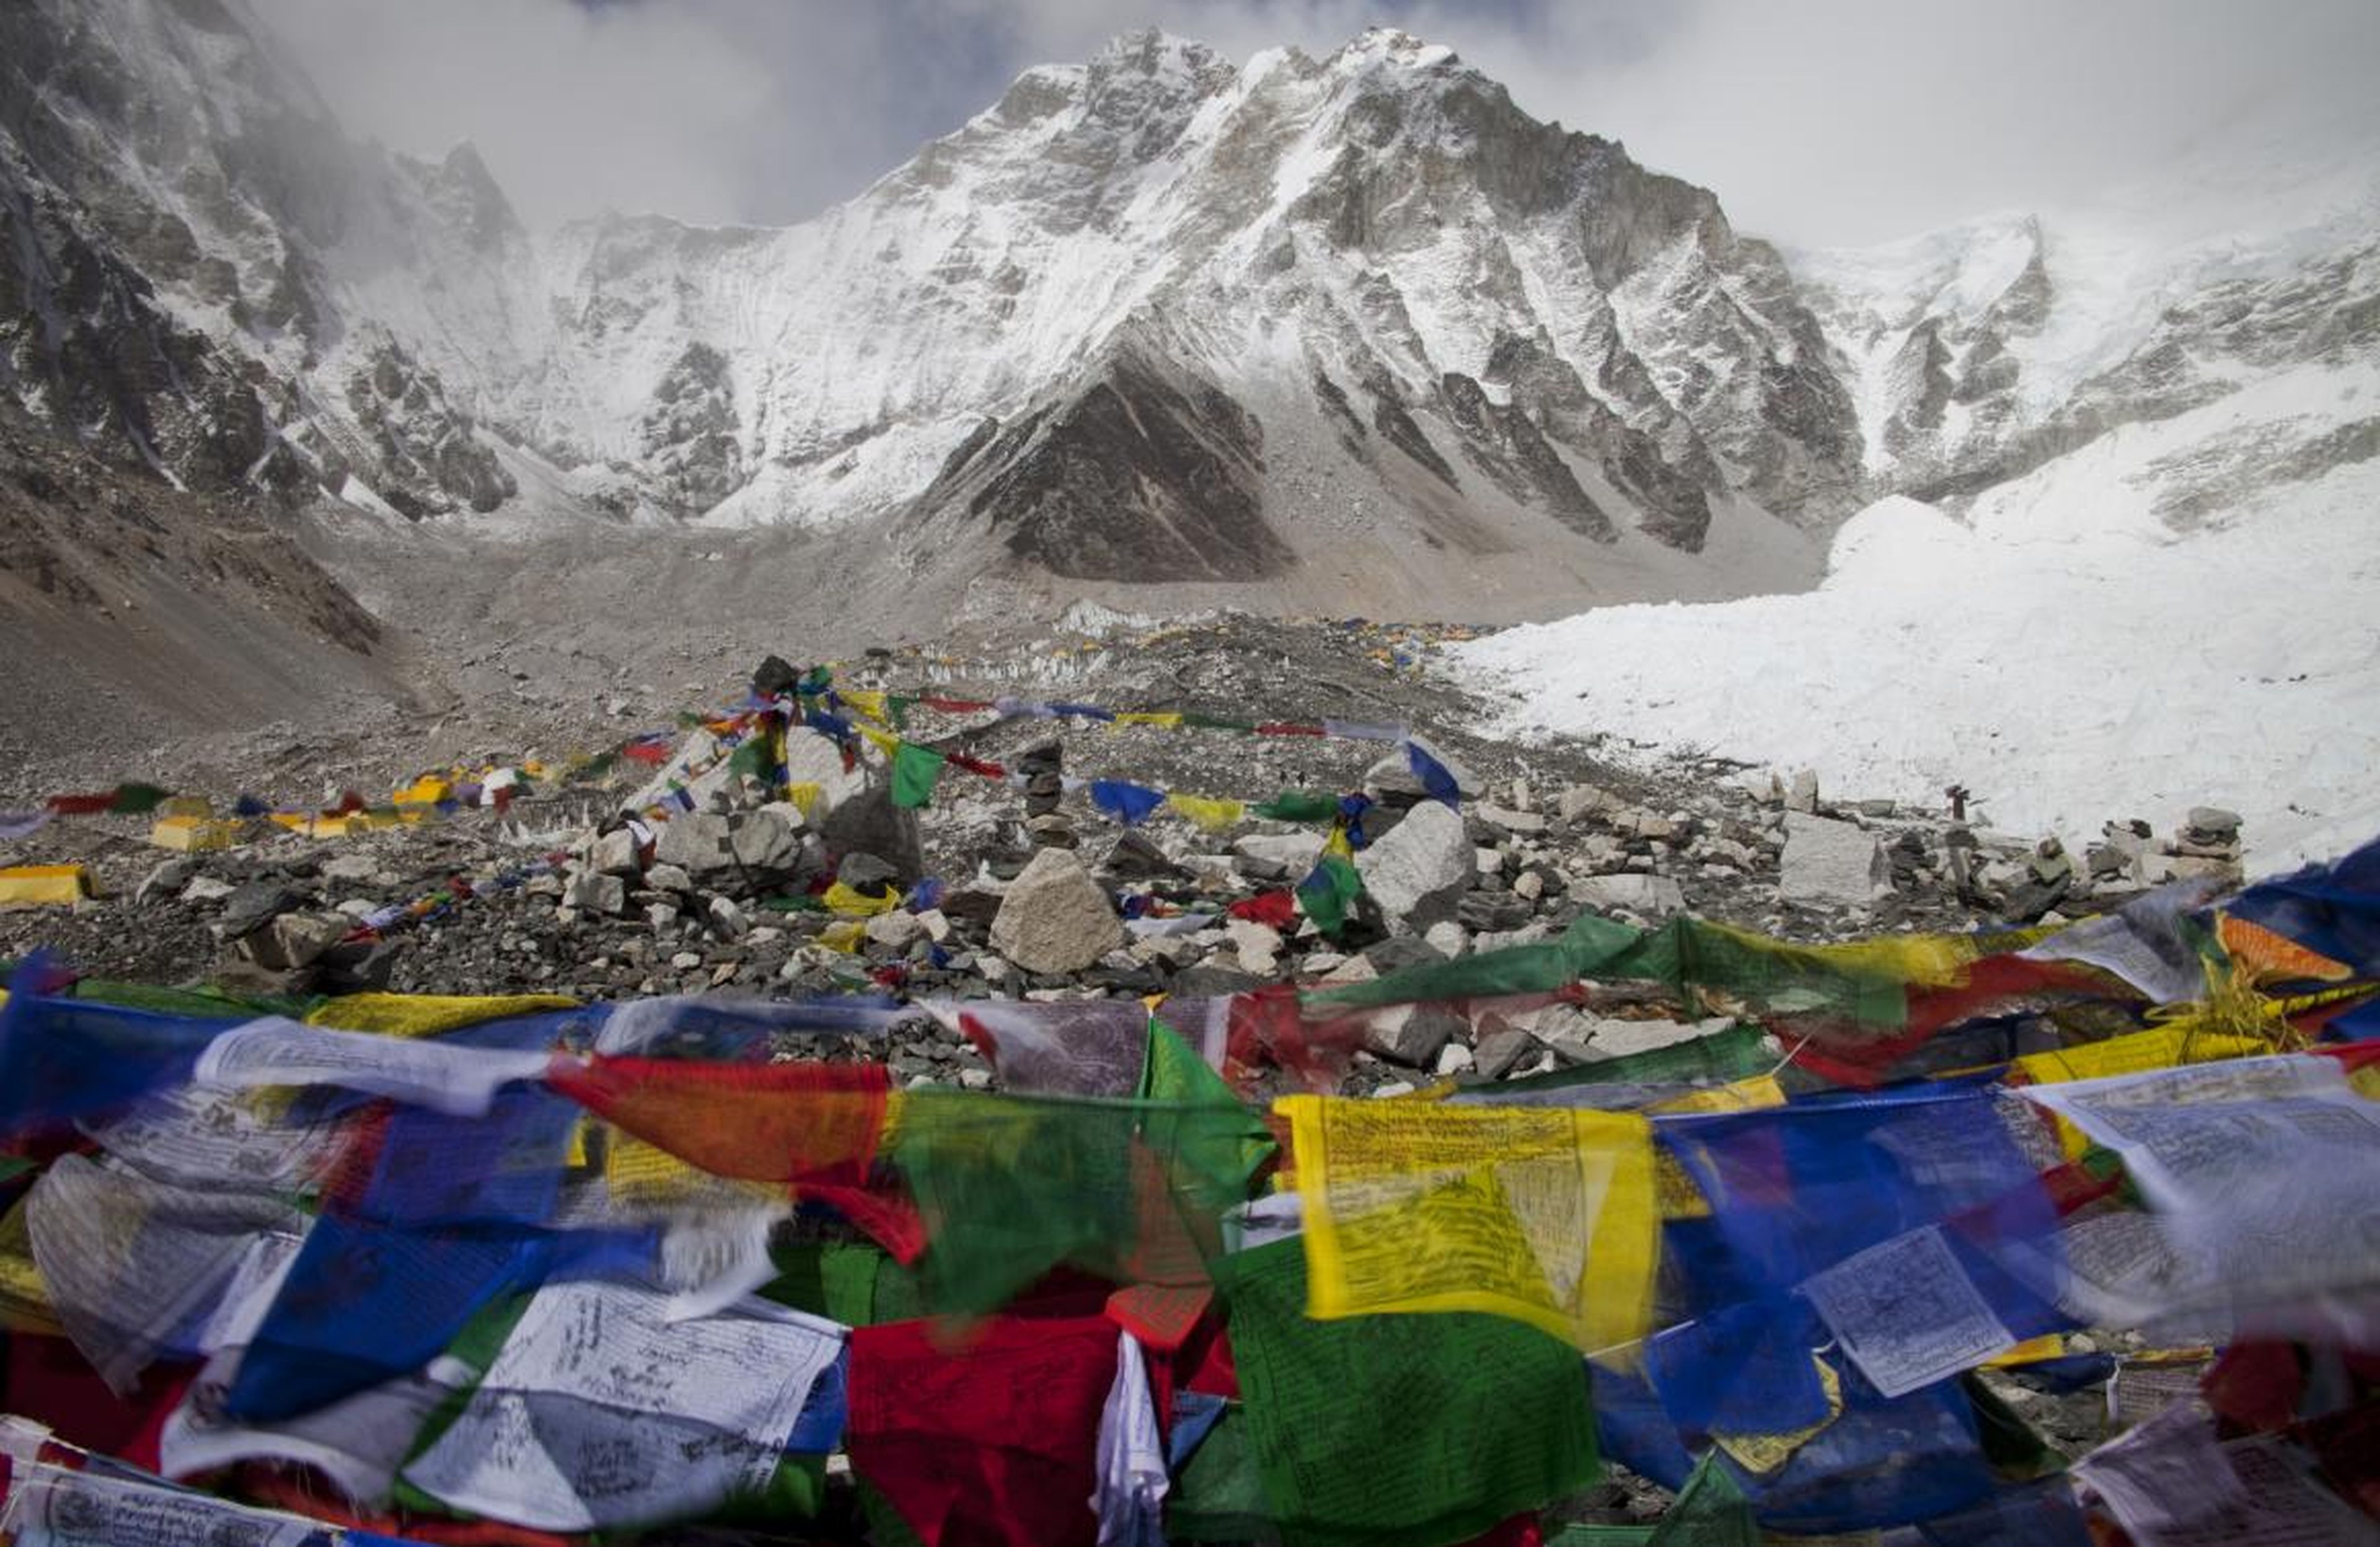 The Mount Everest base camp accumulated so much trash from tourists that it had to be closed.